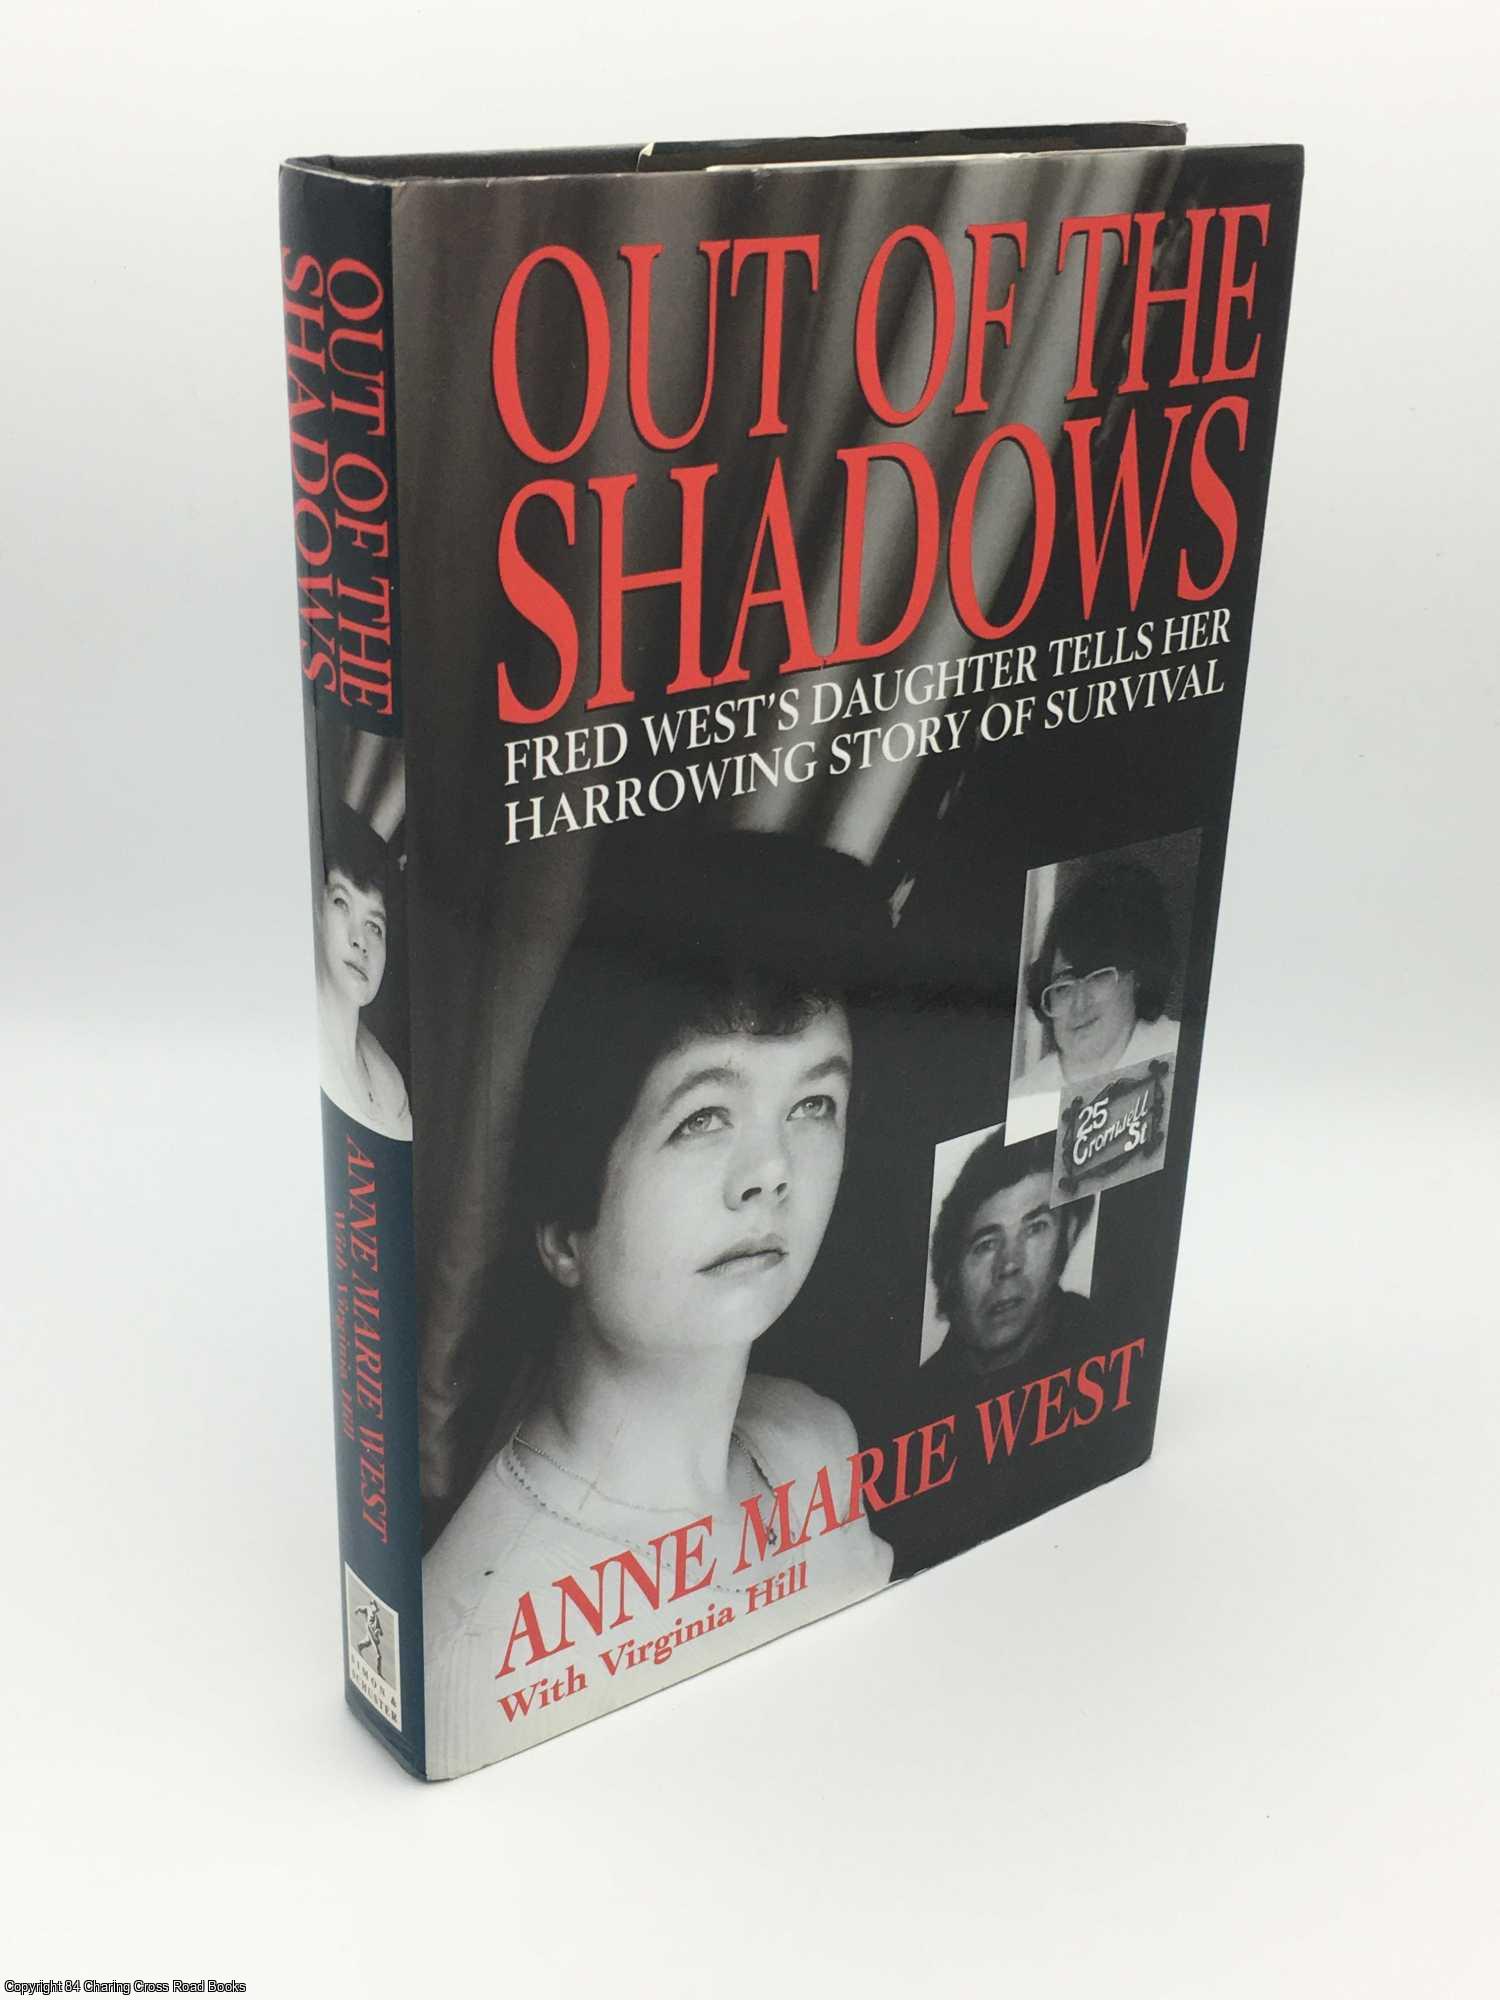 West, Anne Marie; Hill, Virginia - Out of the Shadows